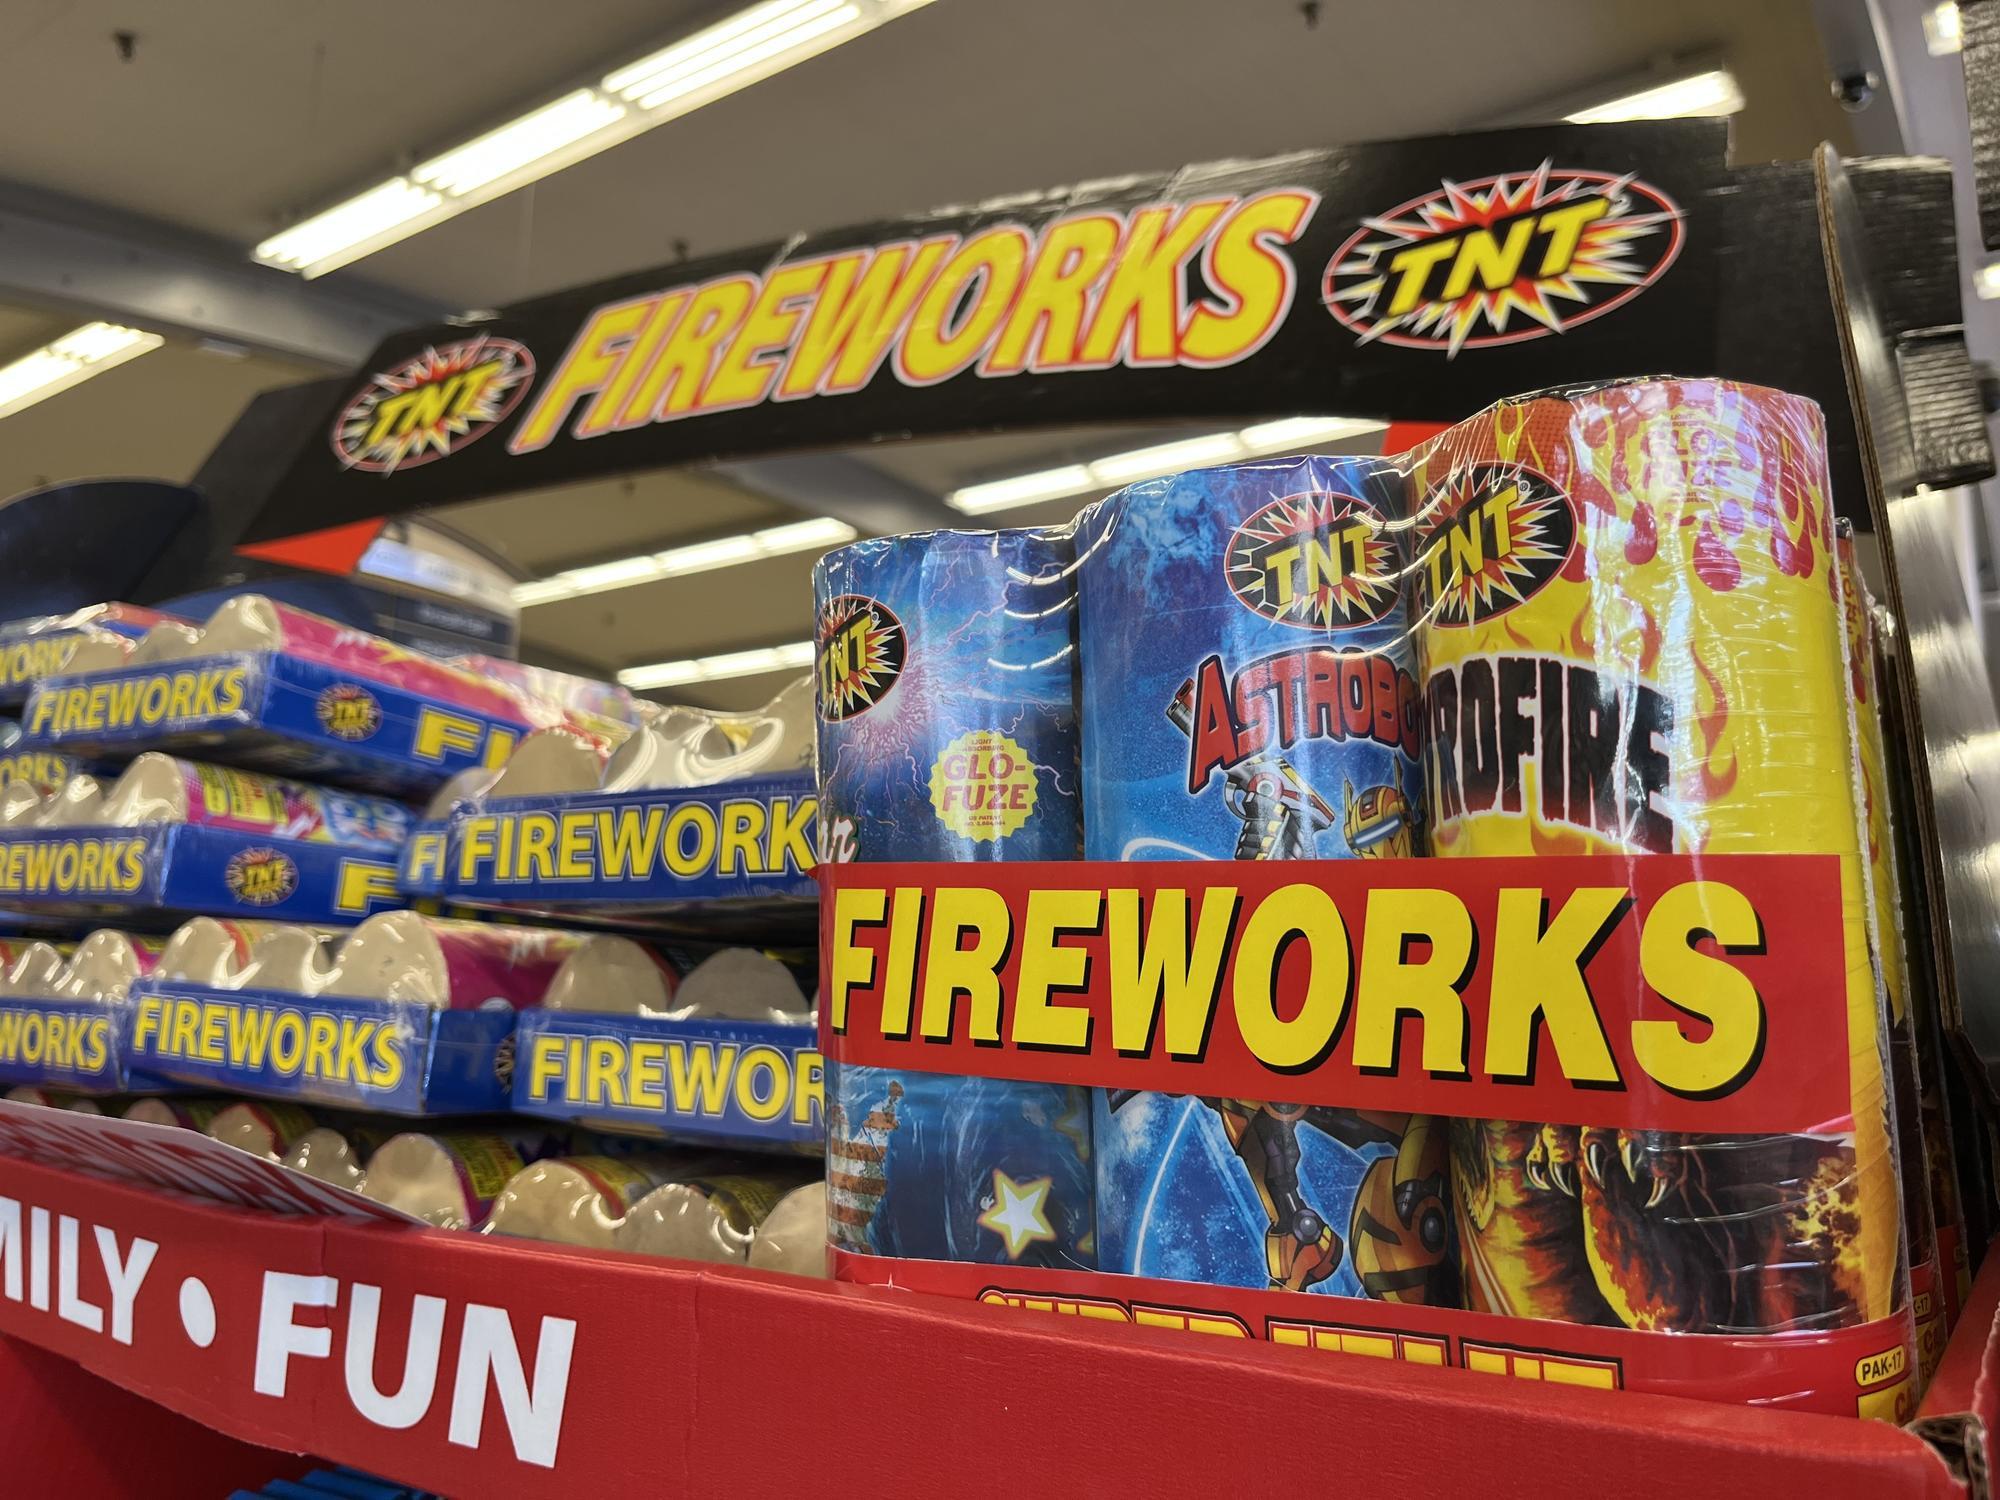 A fireworks stand selling an assortment of products for the 4th of July.